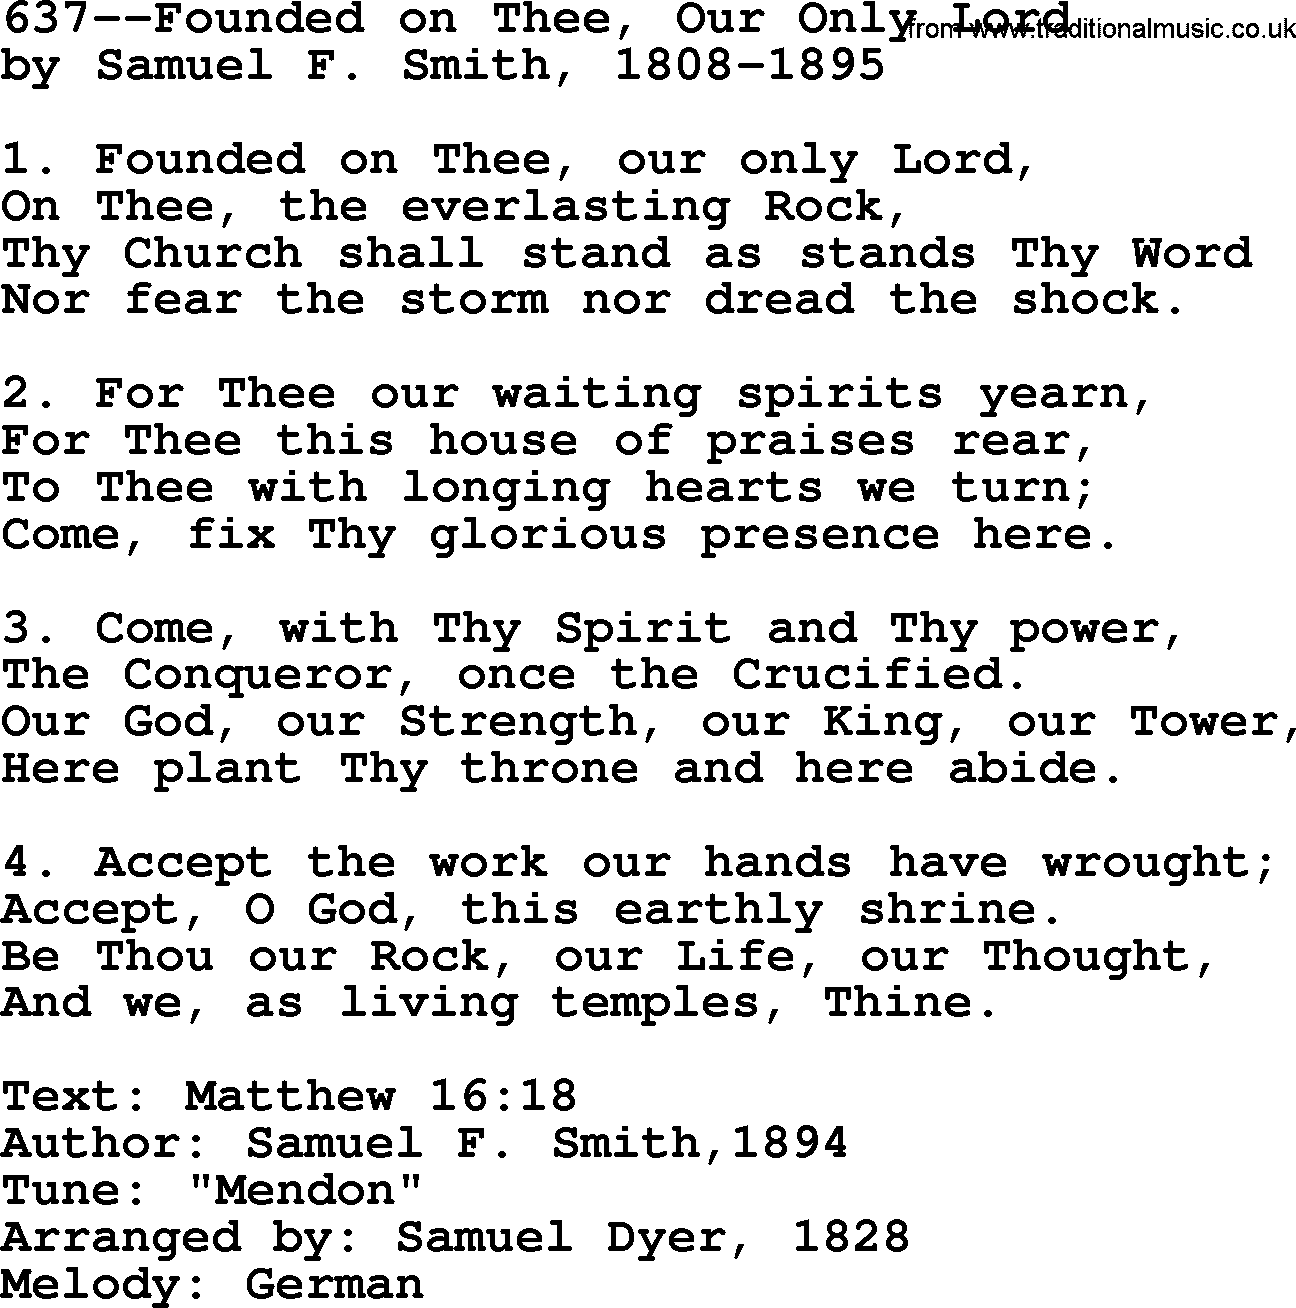 Lutheran Hymn: 637--Founded on Thee, Our Only Lord.txt lyrics with PDF